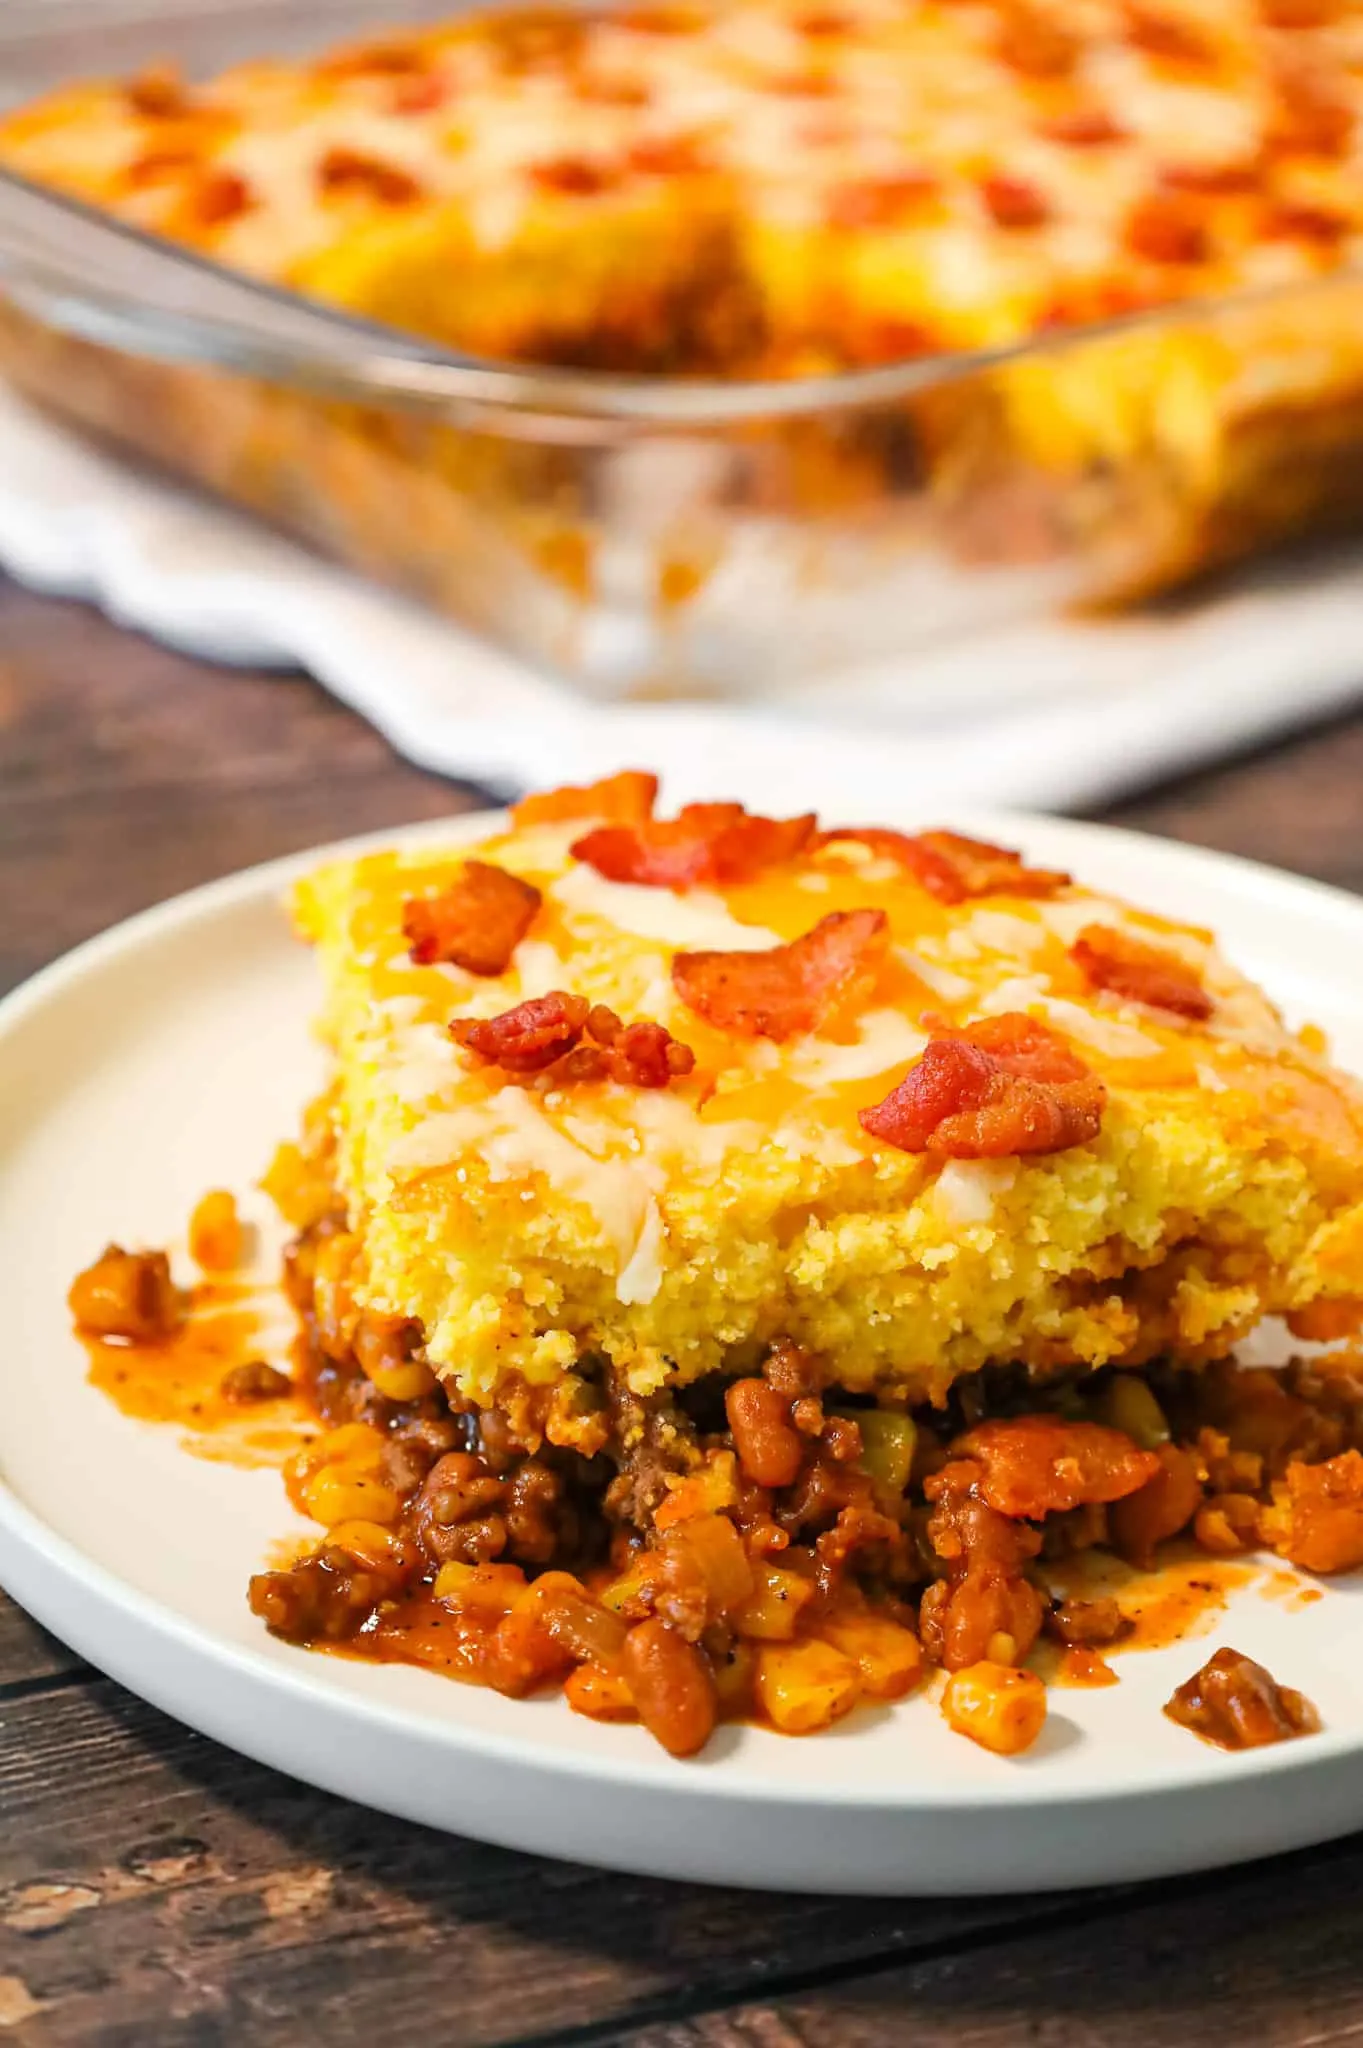 Cowboy Cornbread Casserole is an easy ground beef casserole recipe loaded with bacon, baked beans and corn with Jiffy cornbread baked on top.